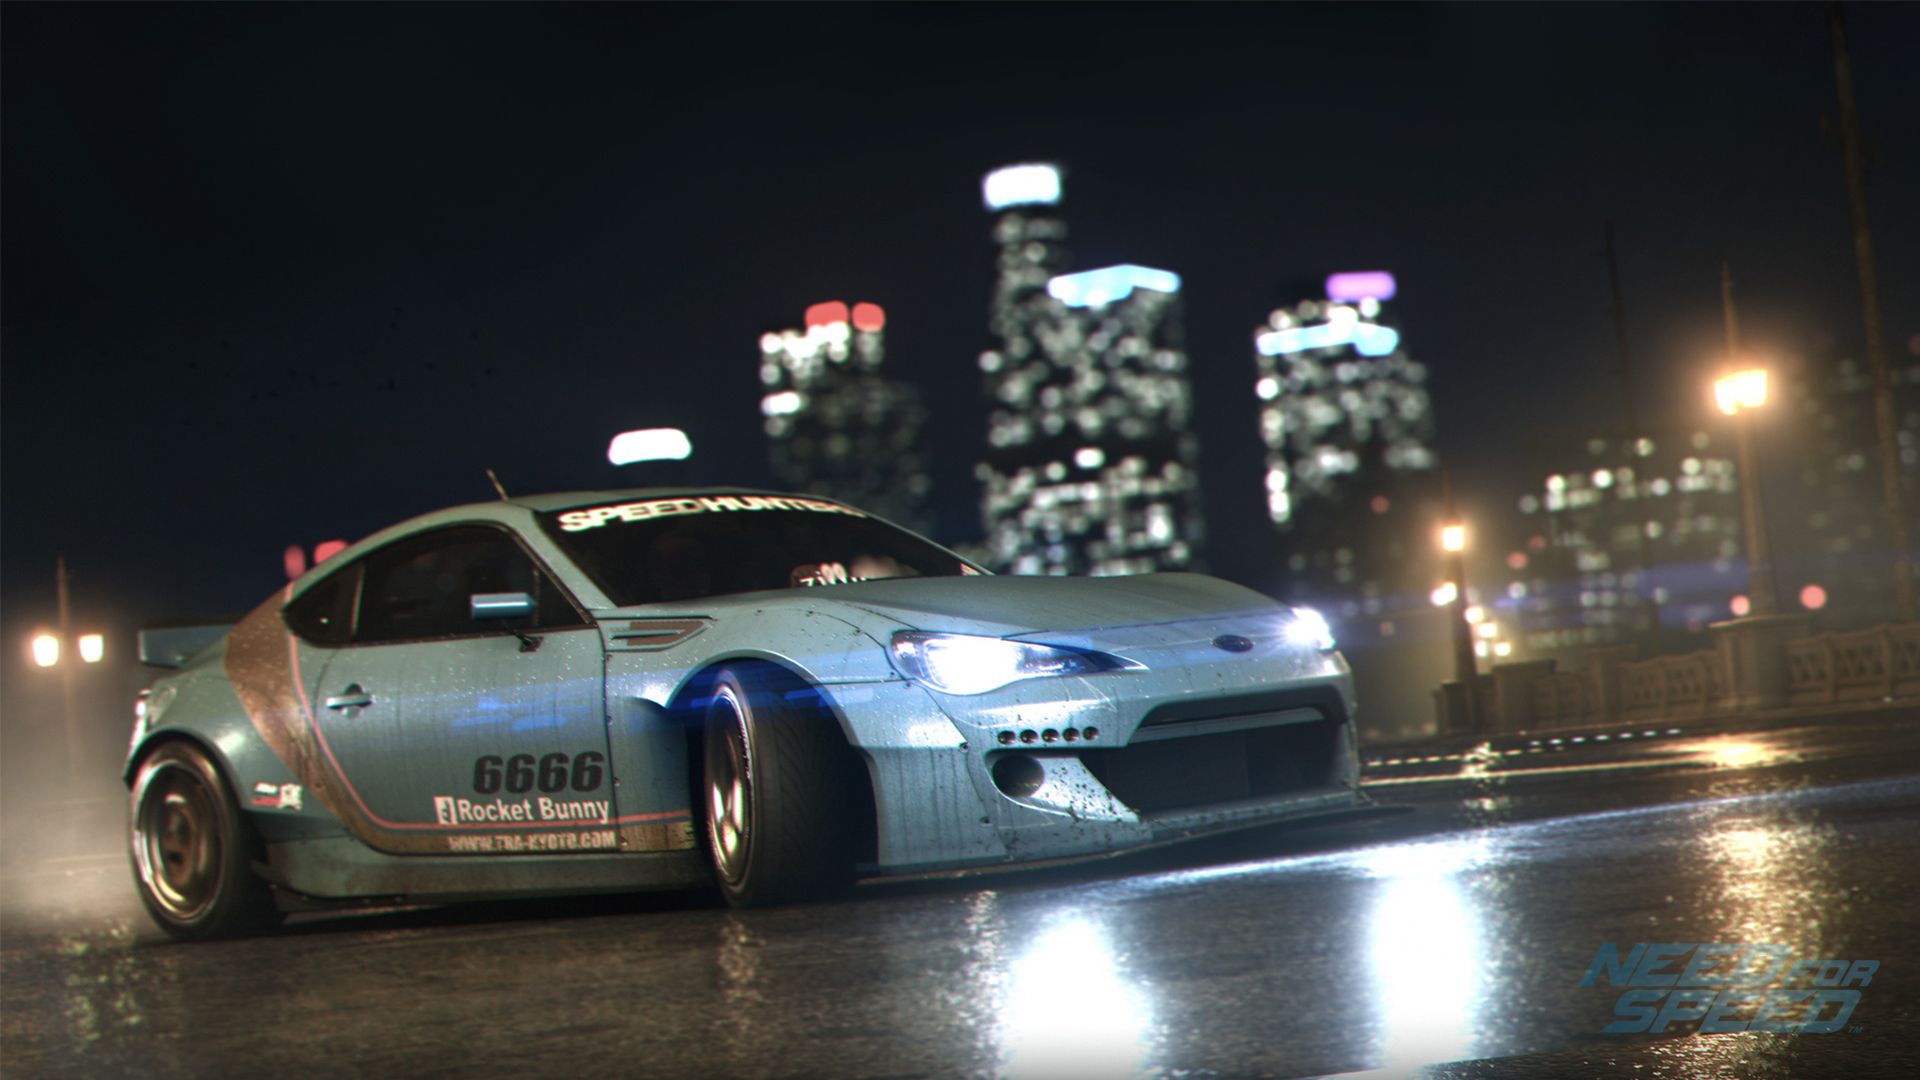 Need for Speed 2015 teaser image hints at Underground 3